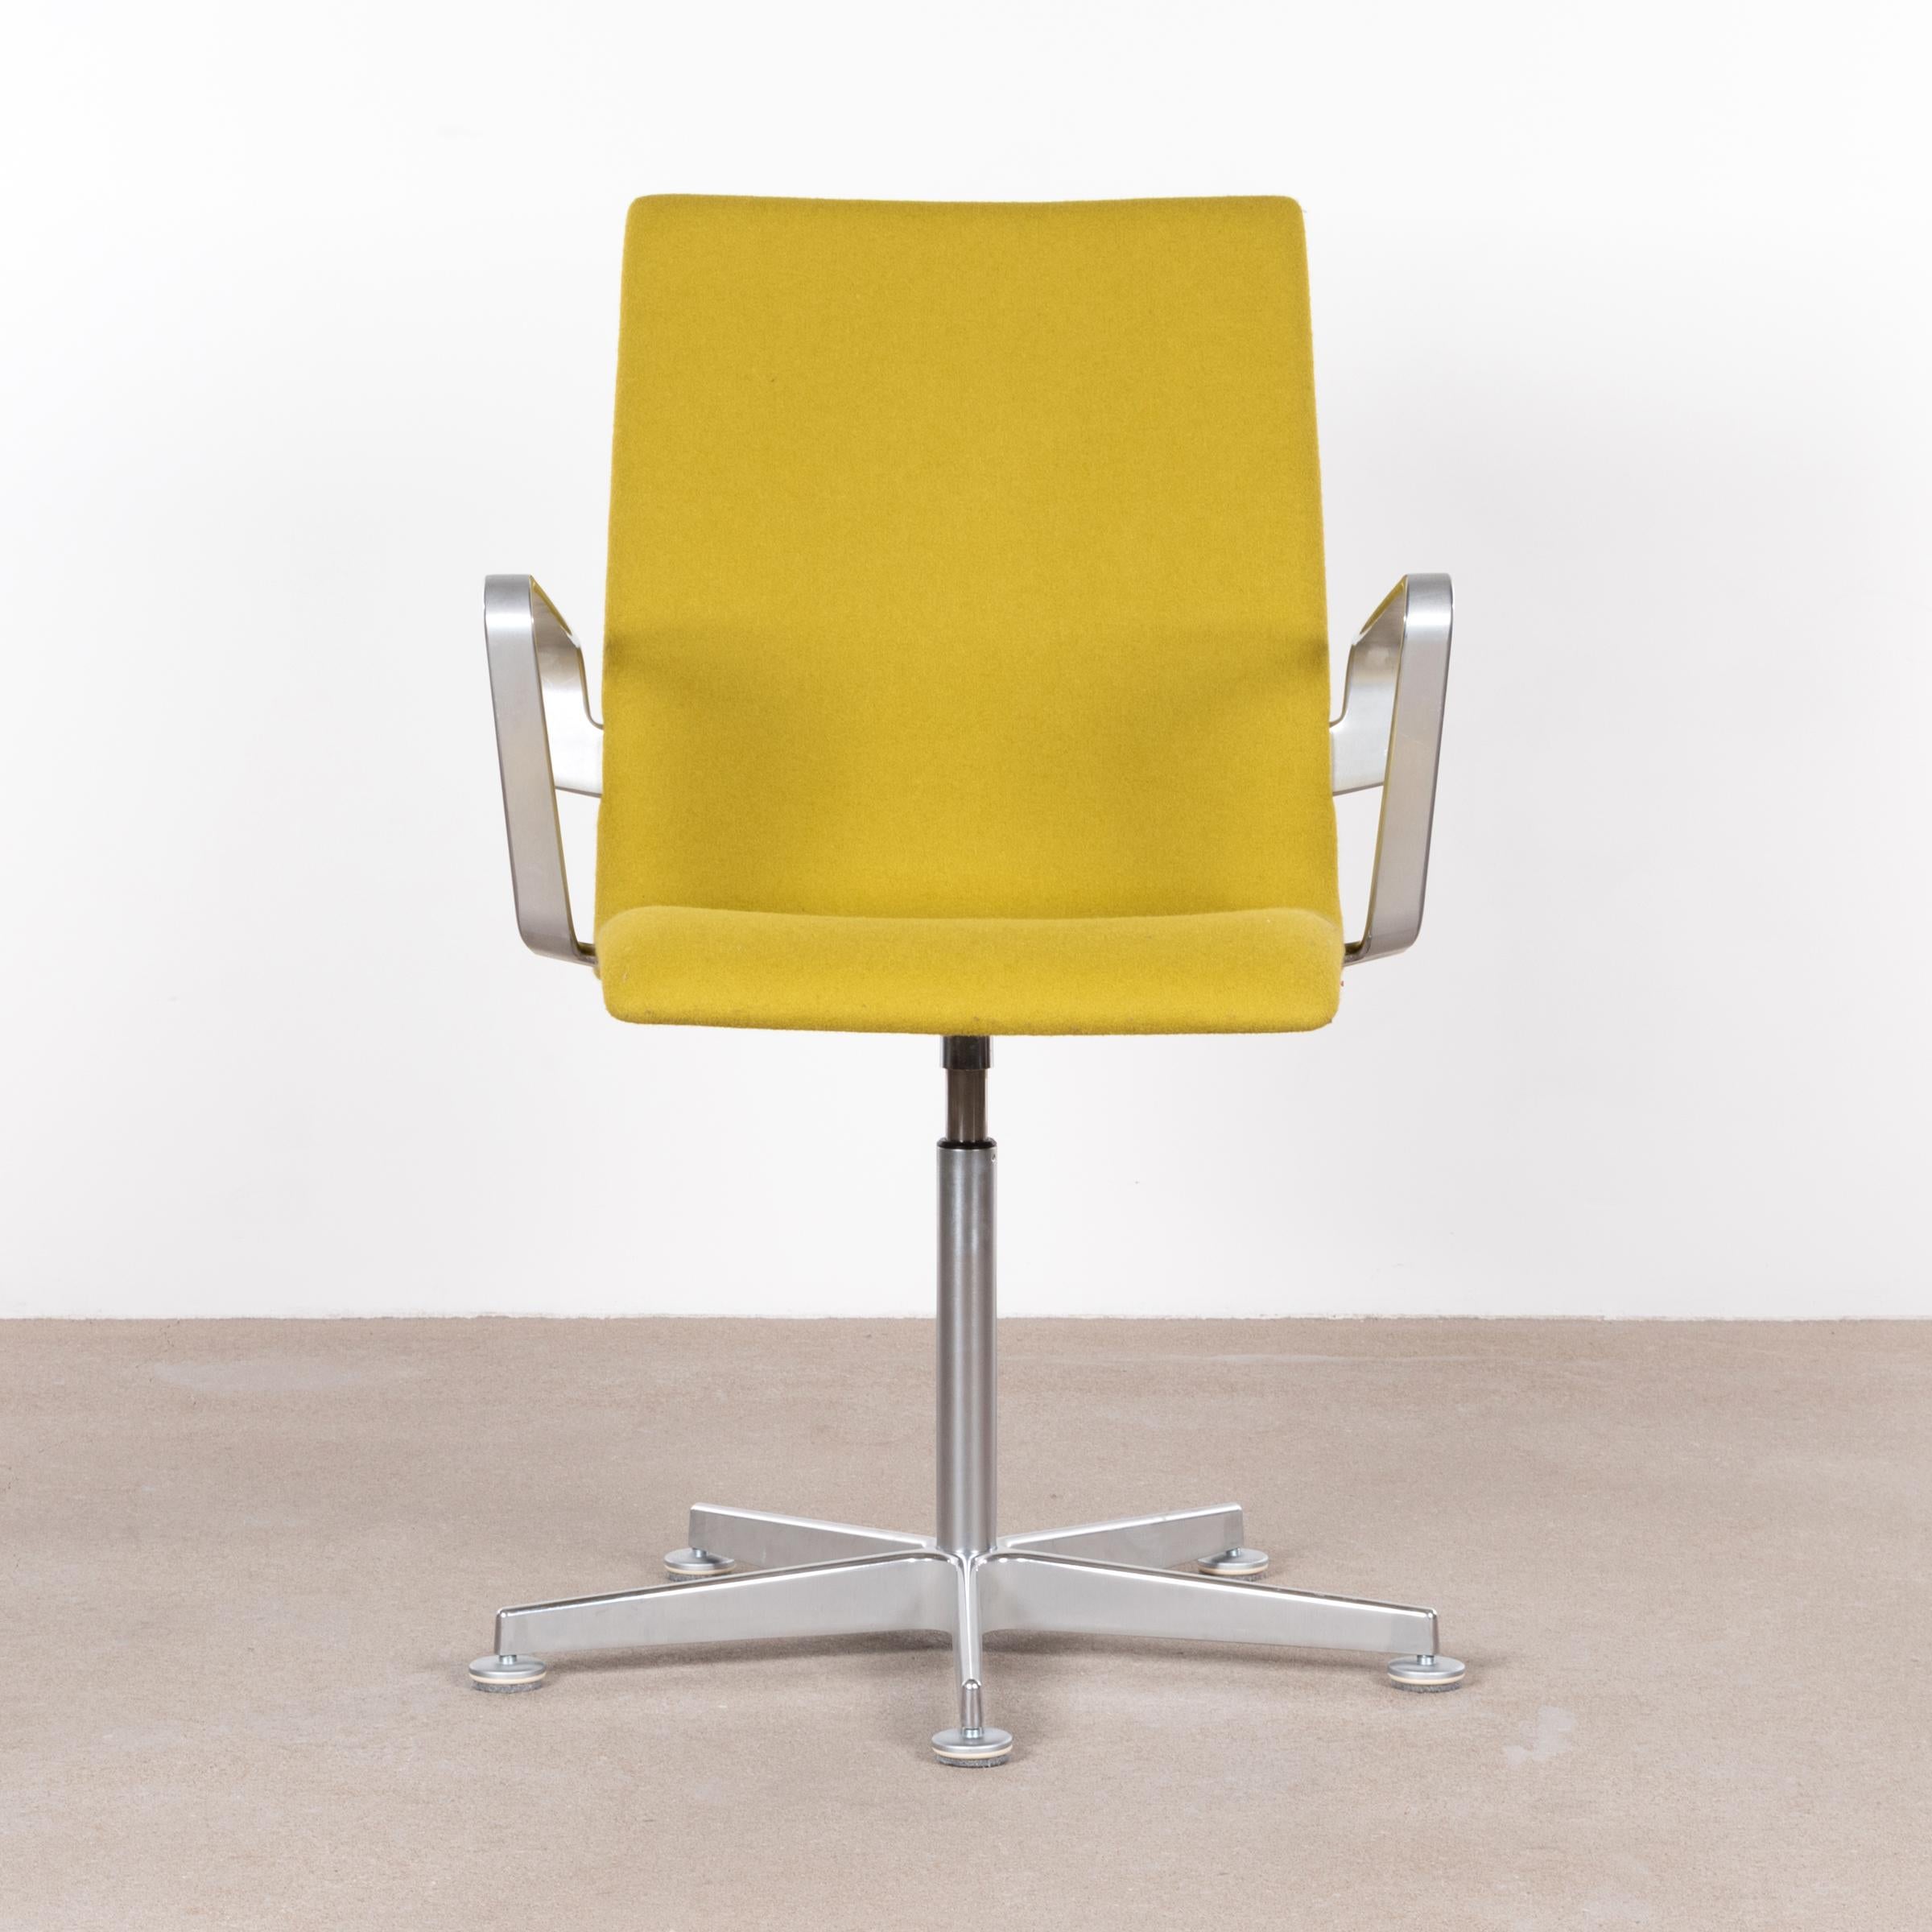 Arne Jacobsen Oxford conference, dining or desk chair produced by Fritz Hansen (Denmark 2008). Aluminium polished frame with lime green wool upholstery all in very good condition.